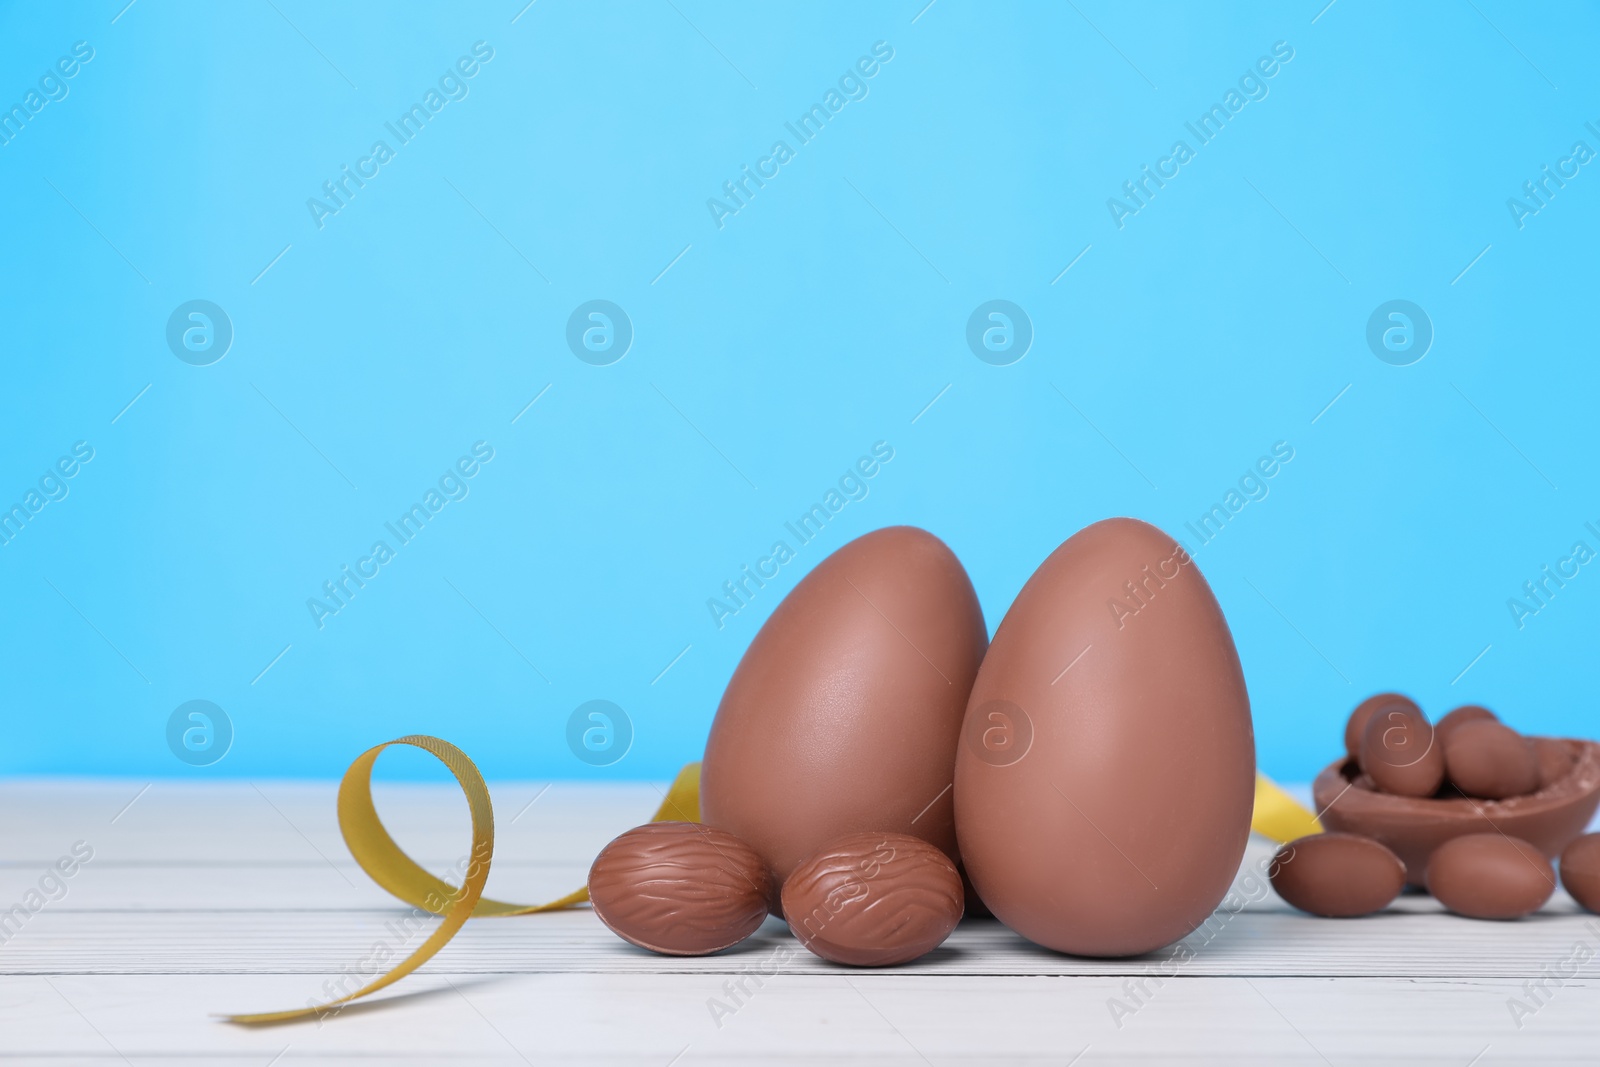 Photo of Delicious chocolate eggs and golden ribbon on white wooden table against light blue background